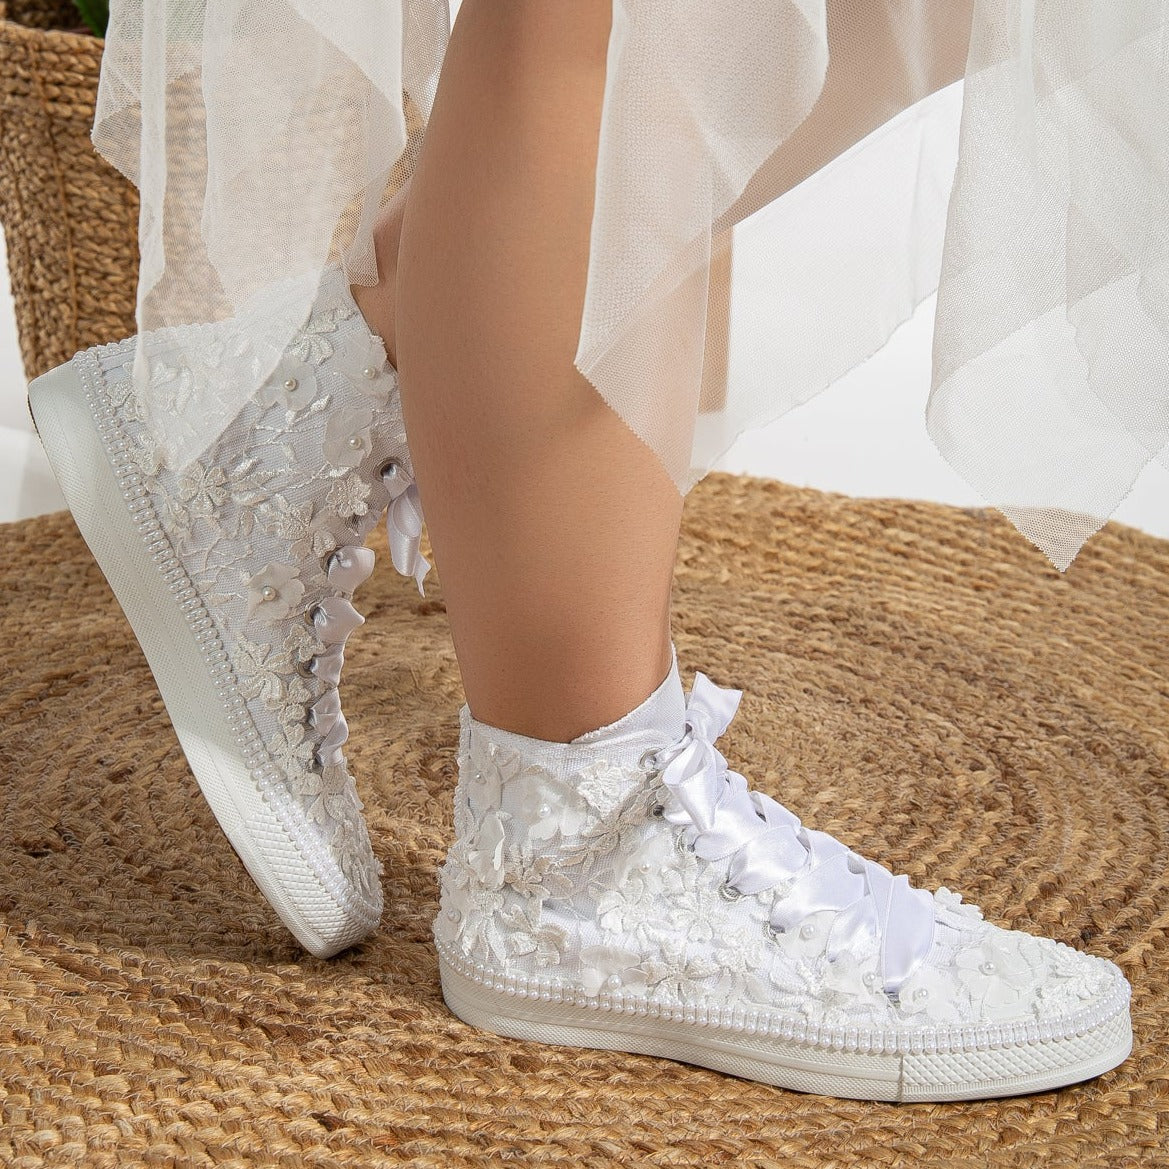 converse, white lace sneakers, lace-up white sneakers, white lace tennis shoes, lace detailed white sneakers, white lace casual shoes, white lace running shoes, women's white lace sneakers, white lace trainers, white lace slip-on sneakers, white lace fashion sneakers